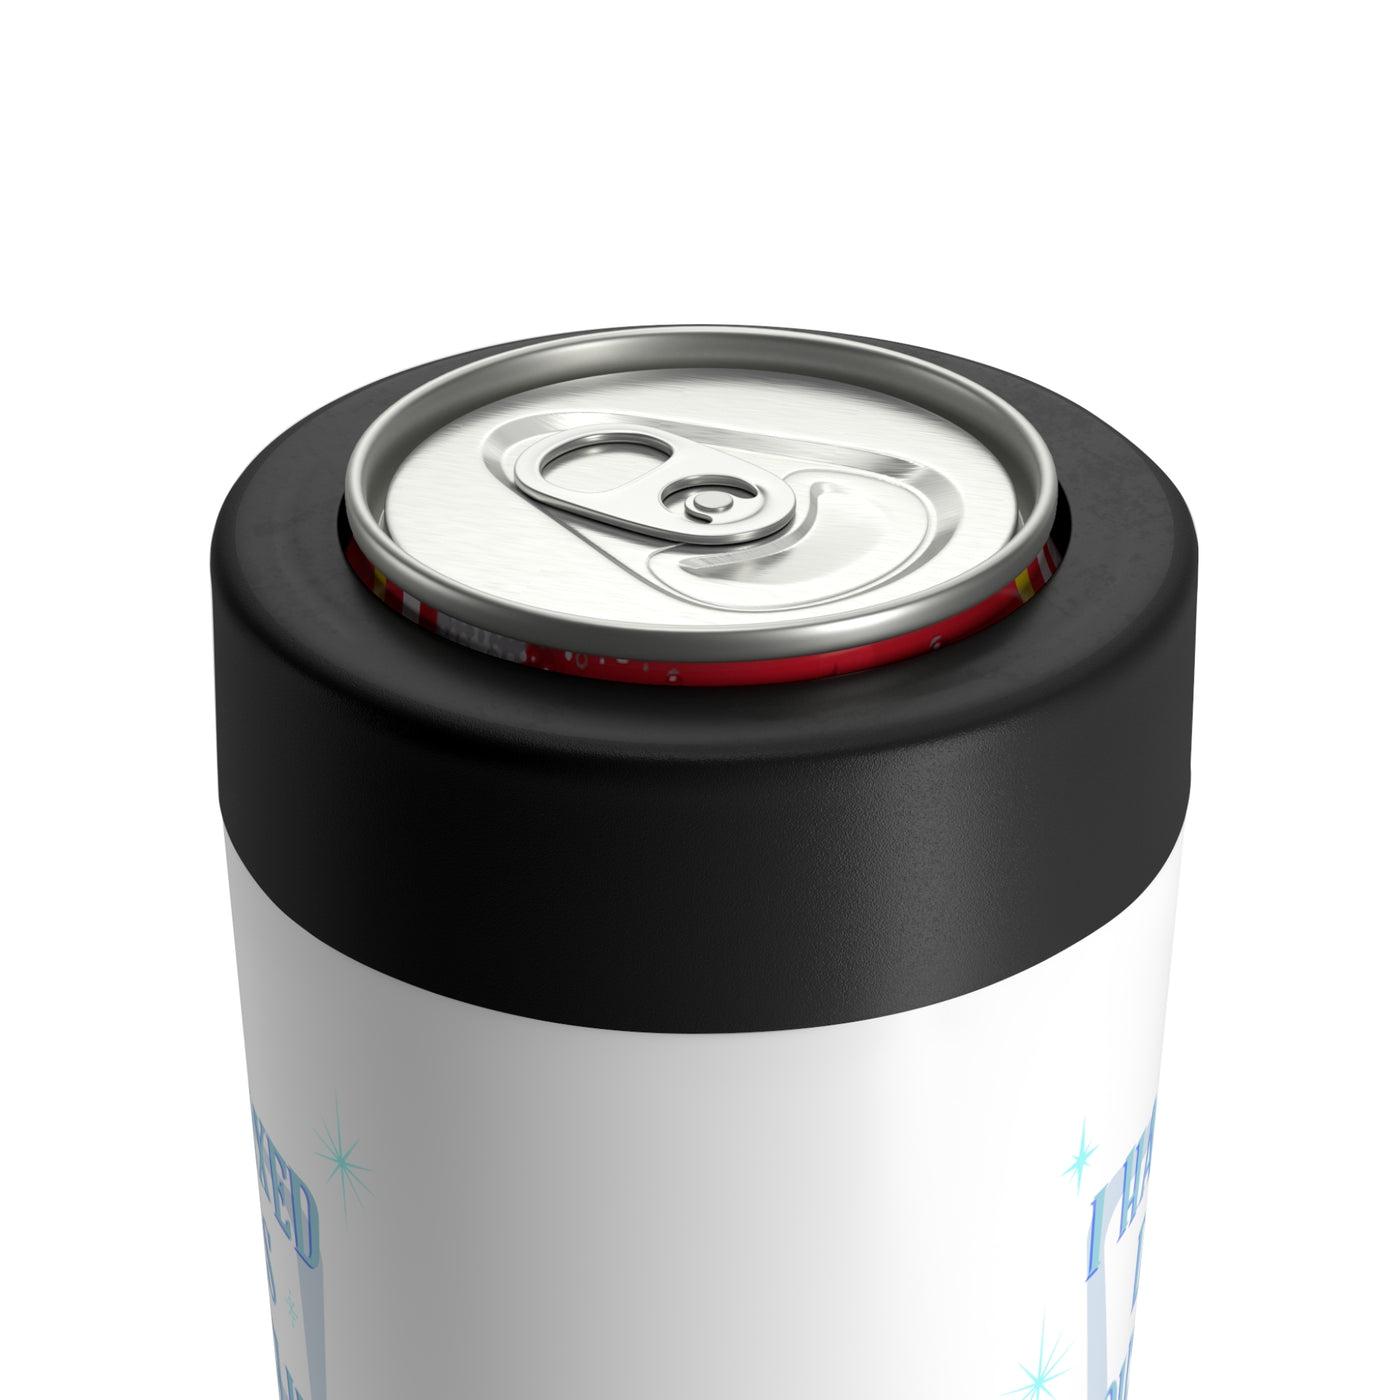 Mixed Drinks About Feelings Stainless Steel Can Holder